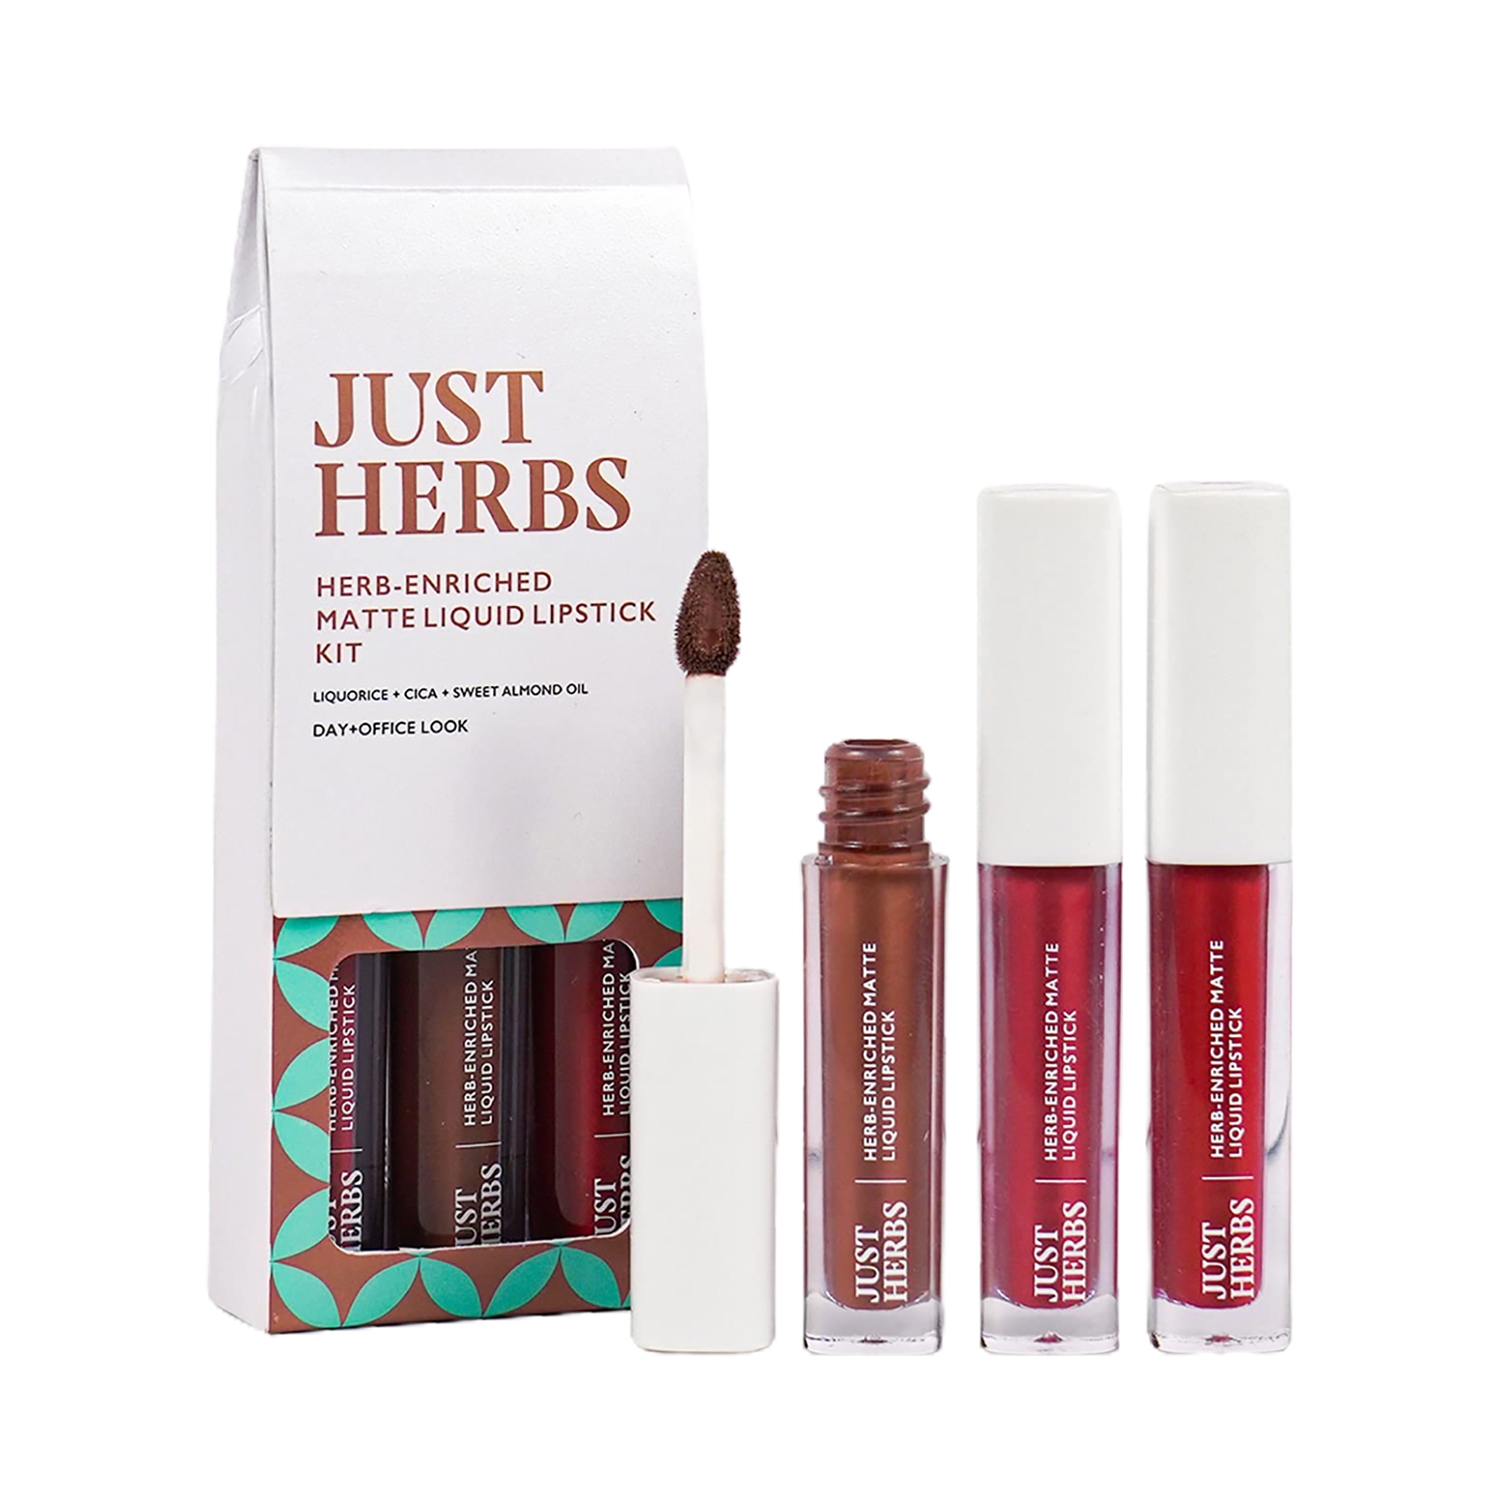 Just Herbs | Just Herbs Enriched Matte Liquid Lipstick - Liquorice Brown, Raisin Rust and Dusty Rose (3 Pcs)